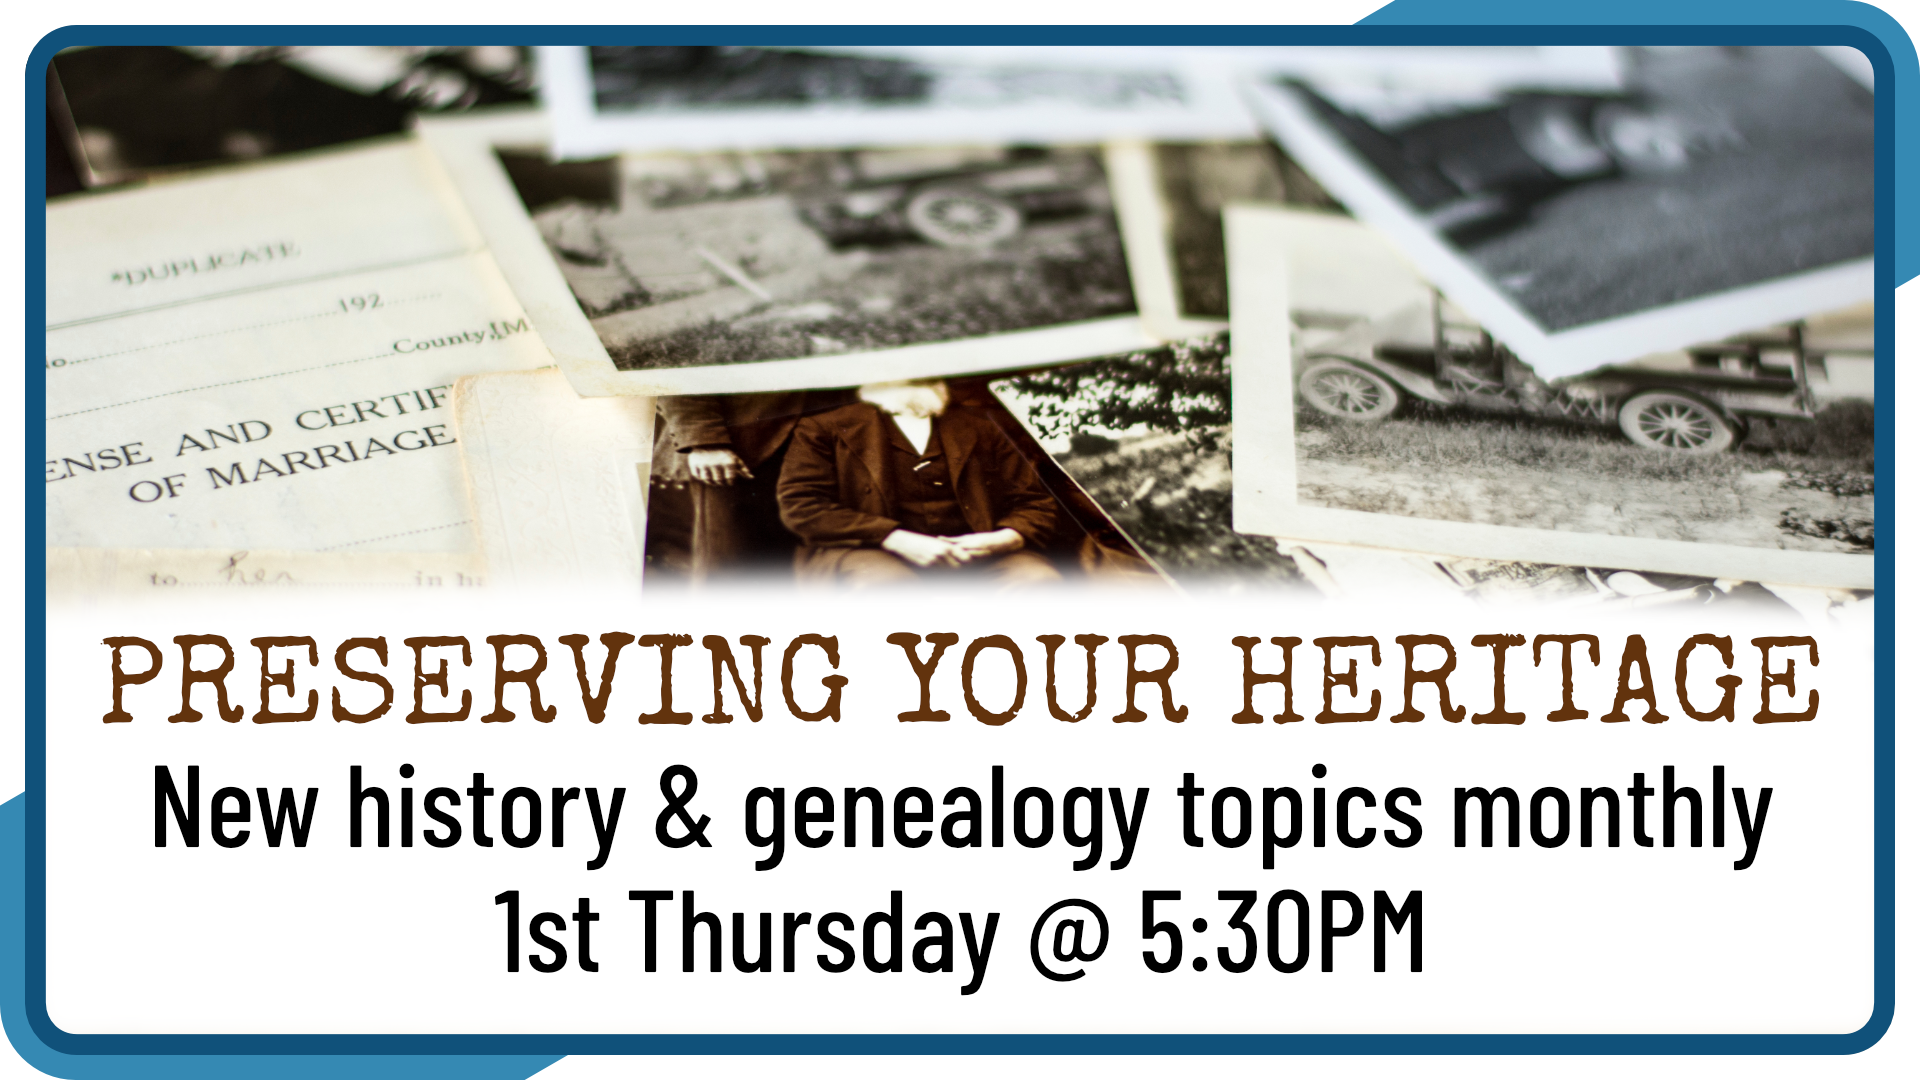 Preserving Your Heritage, first Thursday monthly at 5:30pm, intended for ages 18+